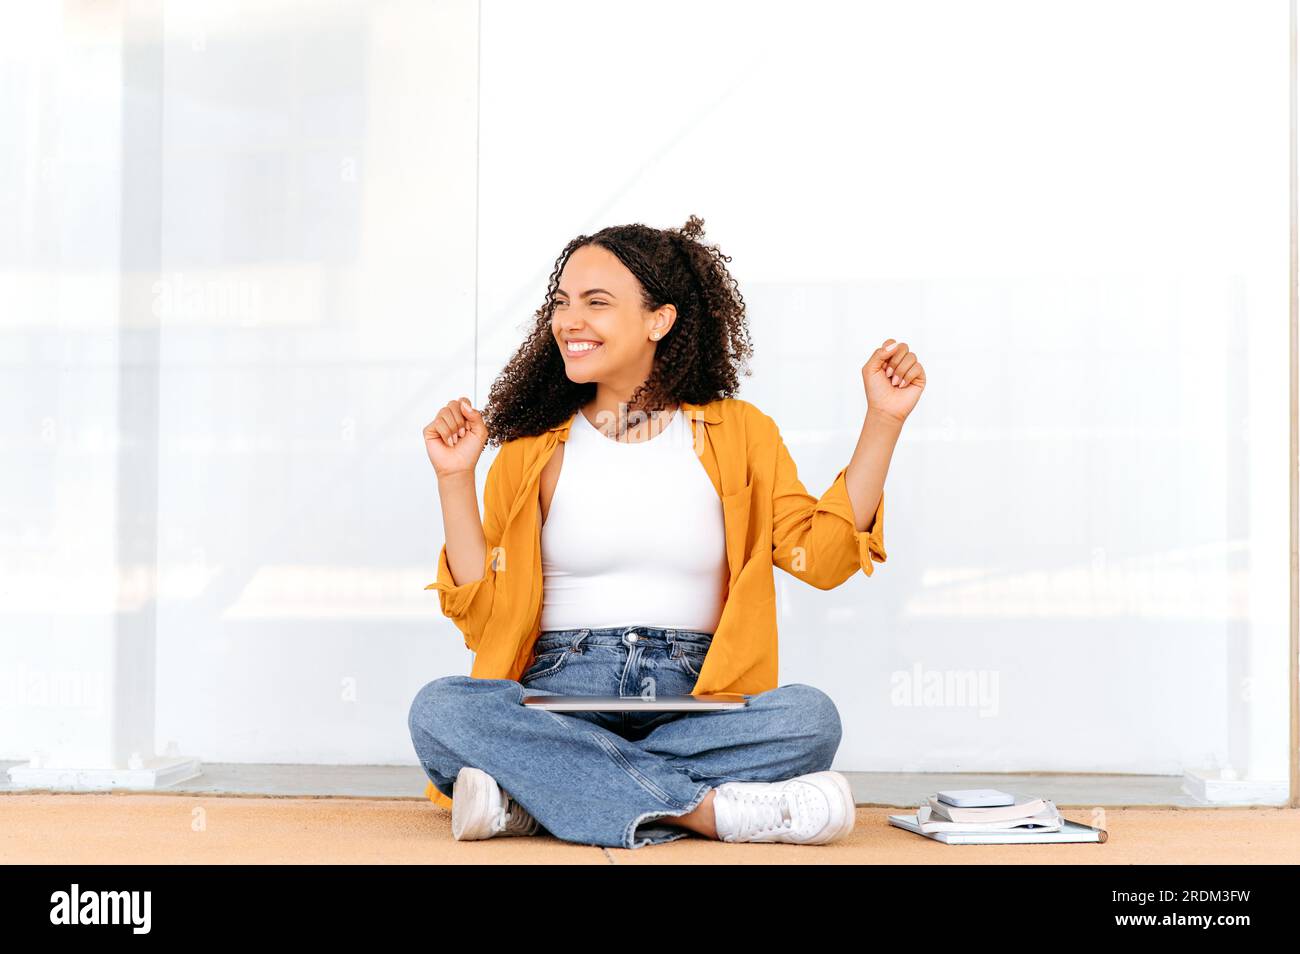 Finishing work or study. Joyful curly haired latino or brazilian female student, sits on the floor near the university, finished studying online, rejoicing, gesturing with hands, dance, smiling Stock Photo